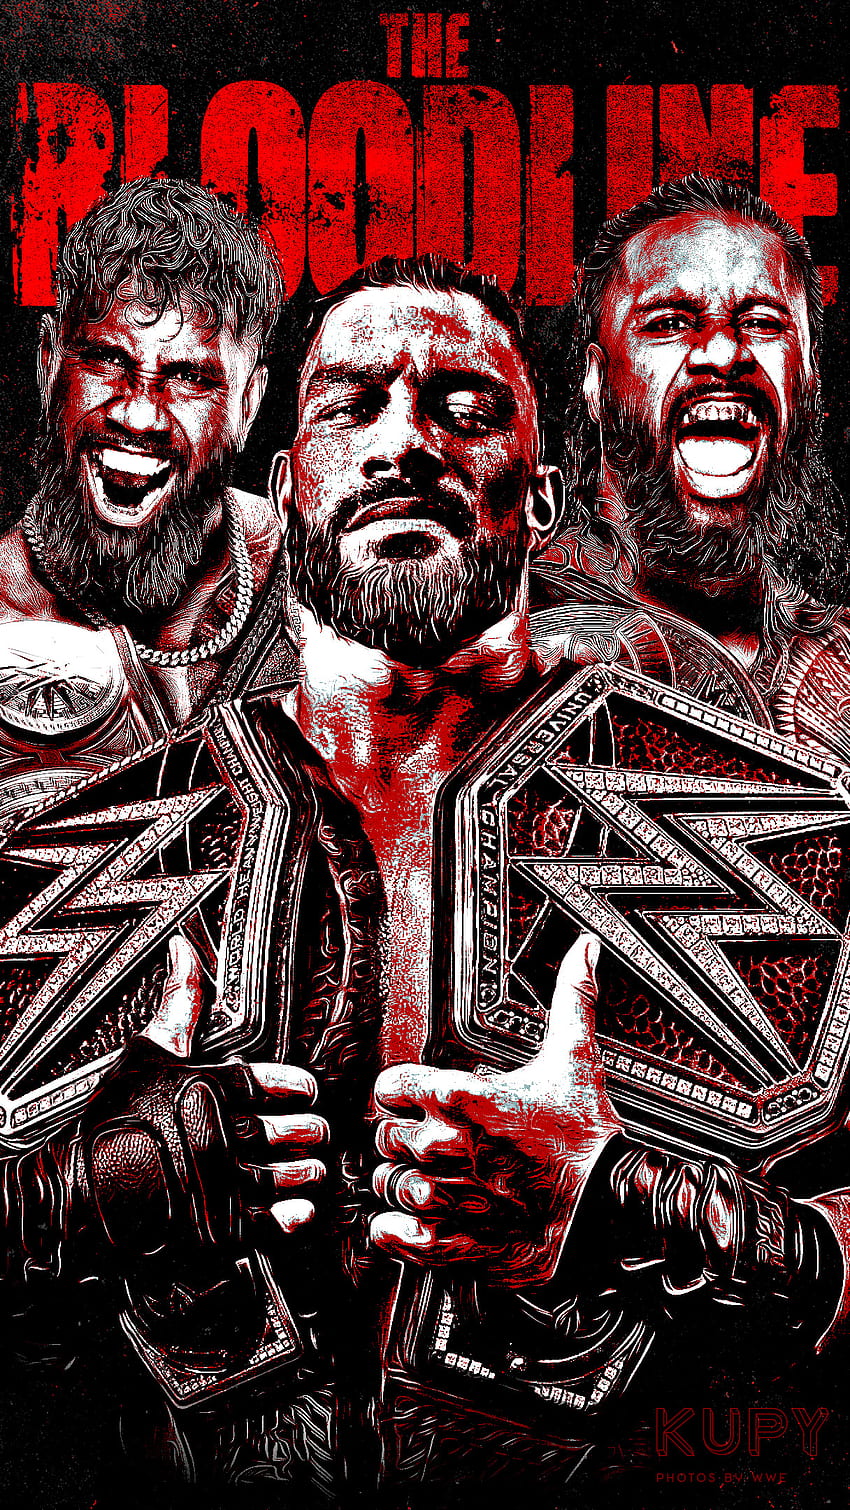 The Bloodline, Kupy, The-Bloodline, WWE, We-The-Ones-Uce, Usos, Roman-Reigns wallpaper ponsel HD